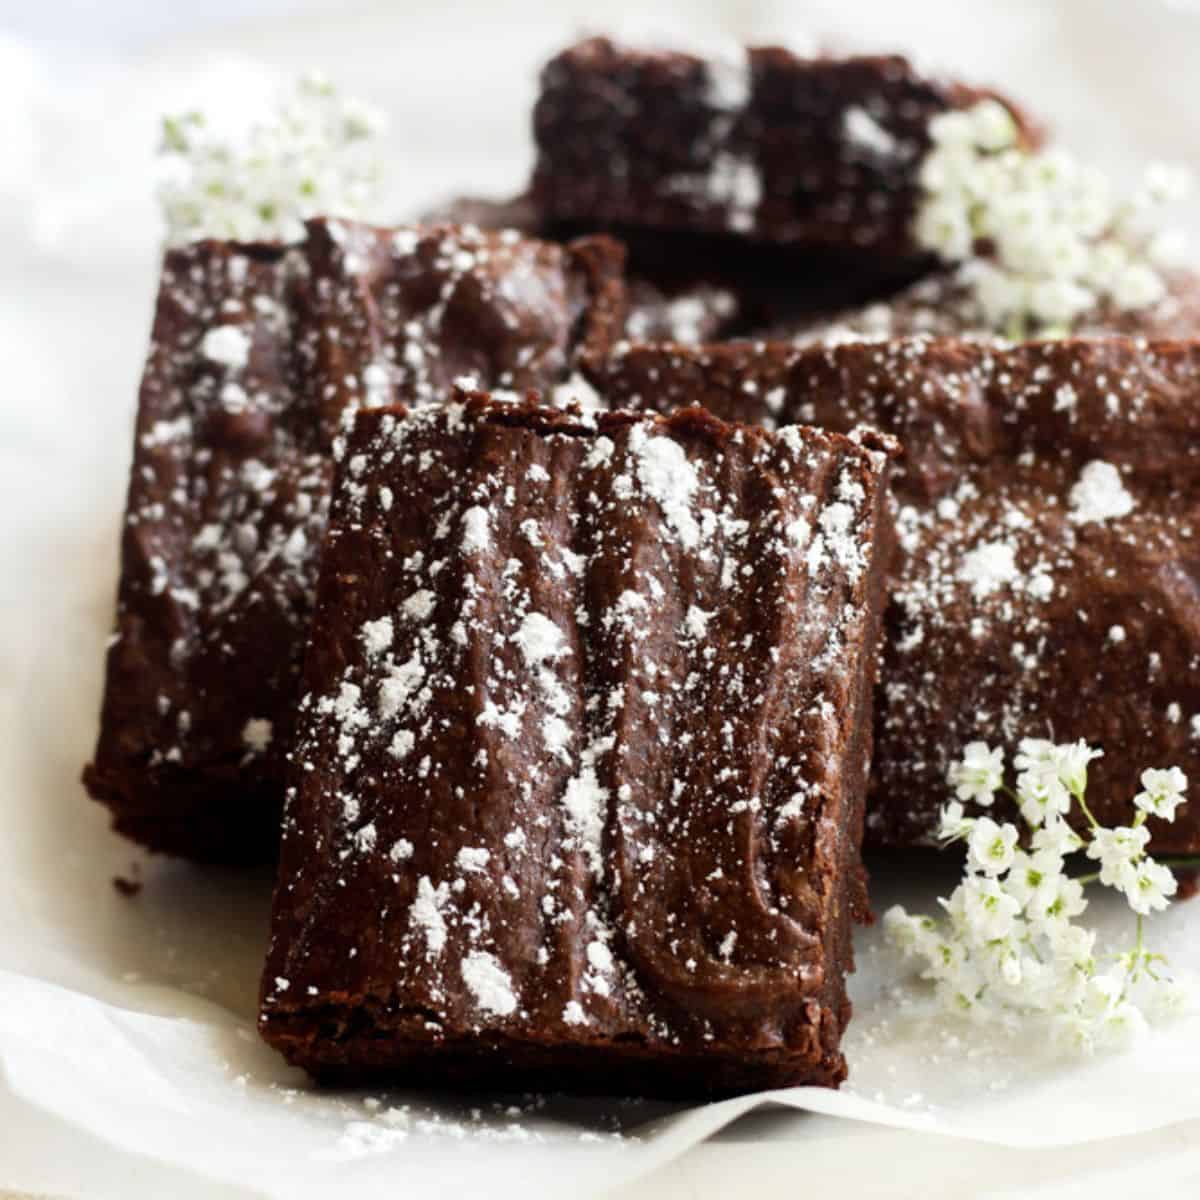 dairy free brownies dusted with powdered sugar on a white plate.